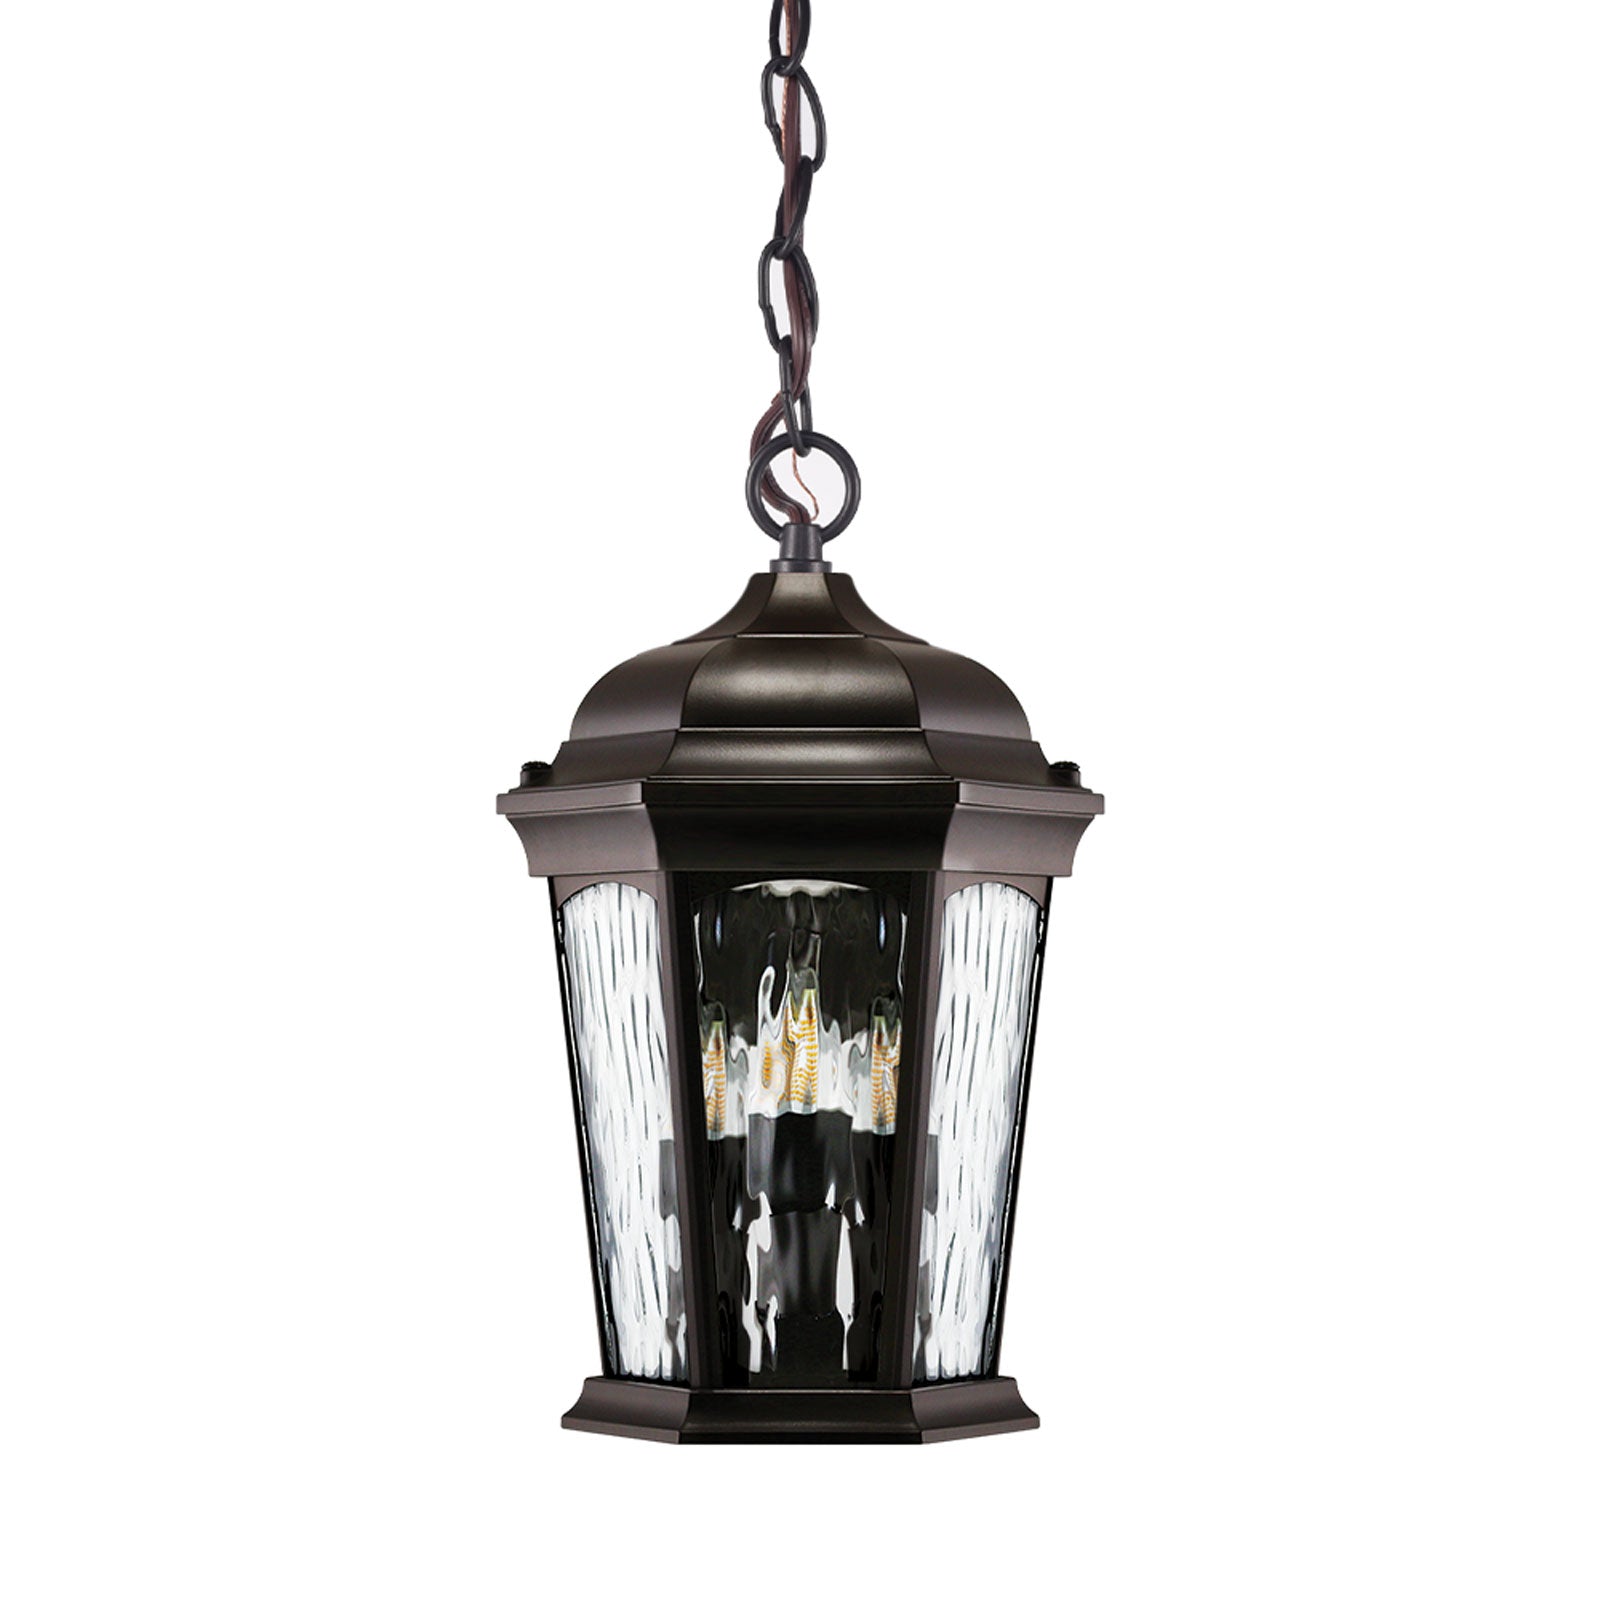 LED Outdoor Hanging Wall Lantern with Sensor & Water Glass (Bronze)